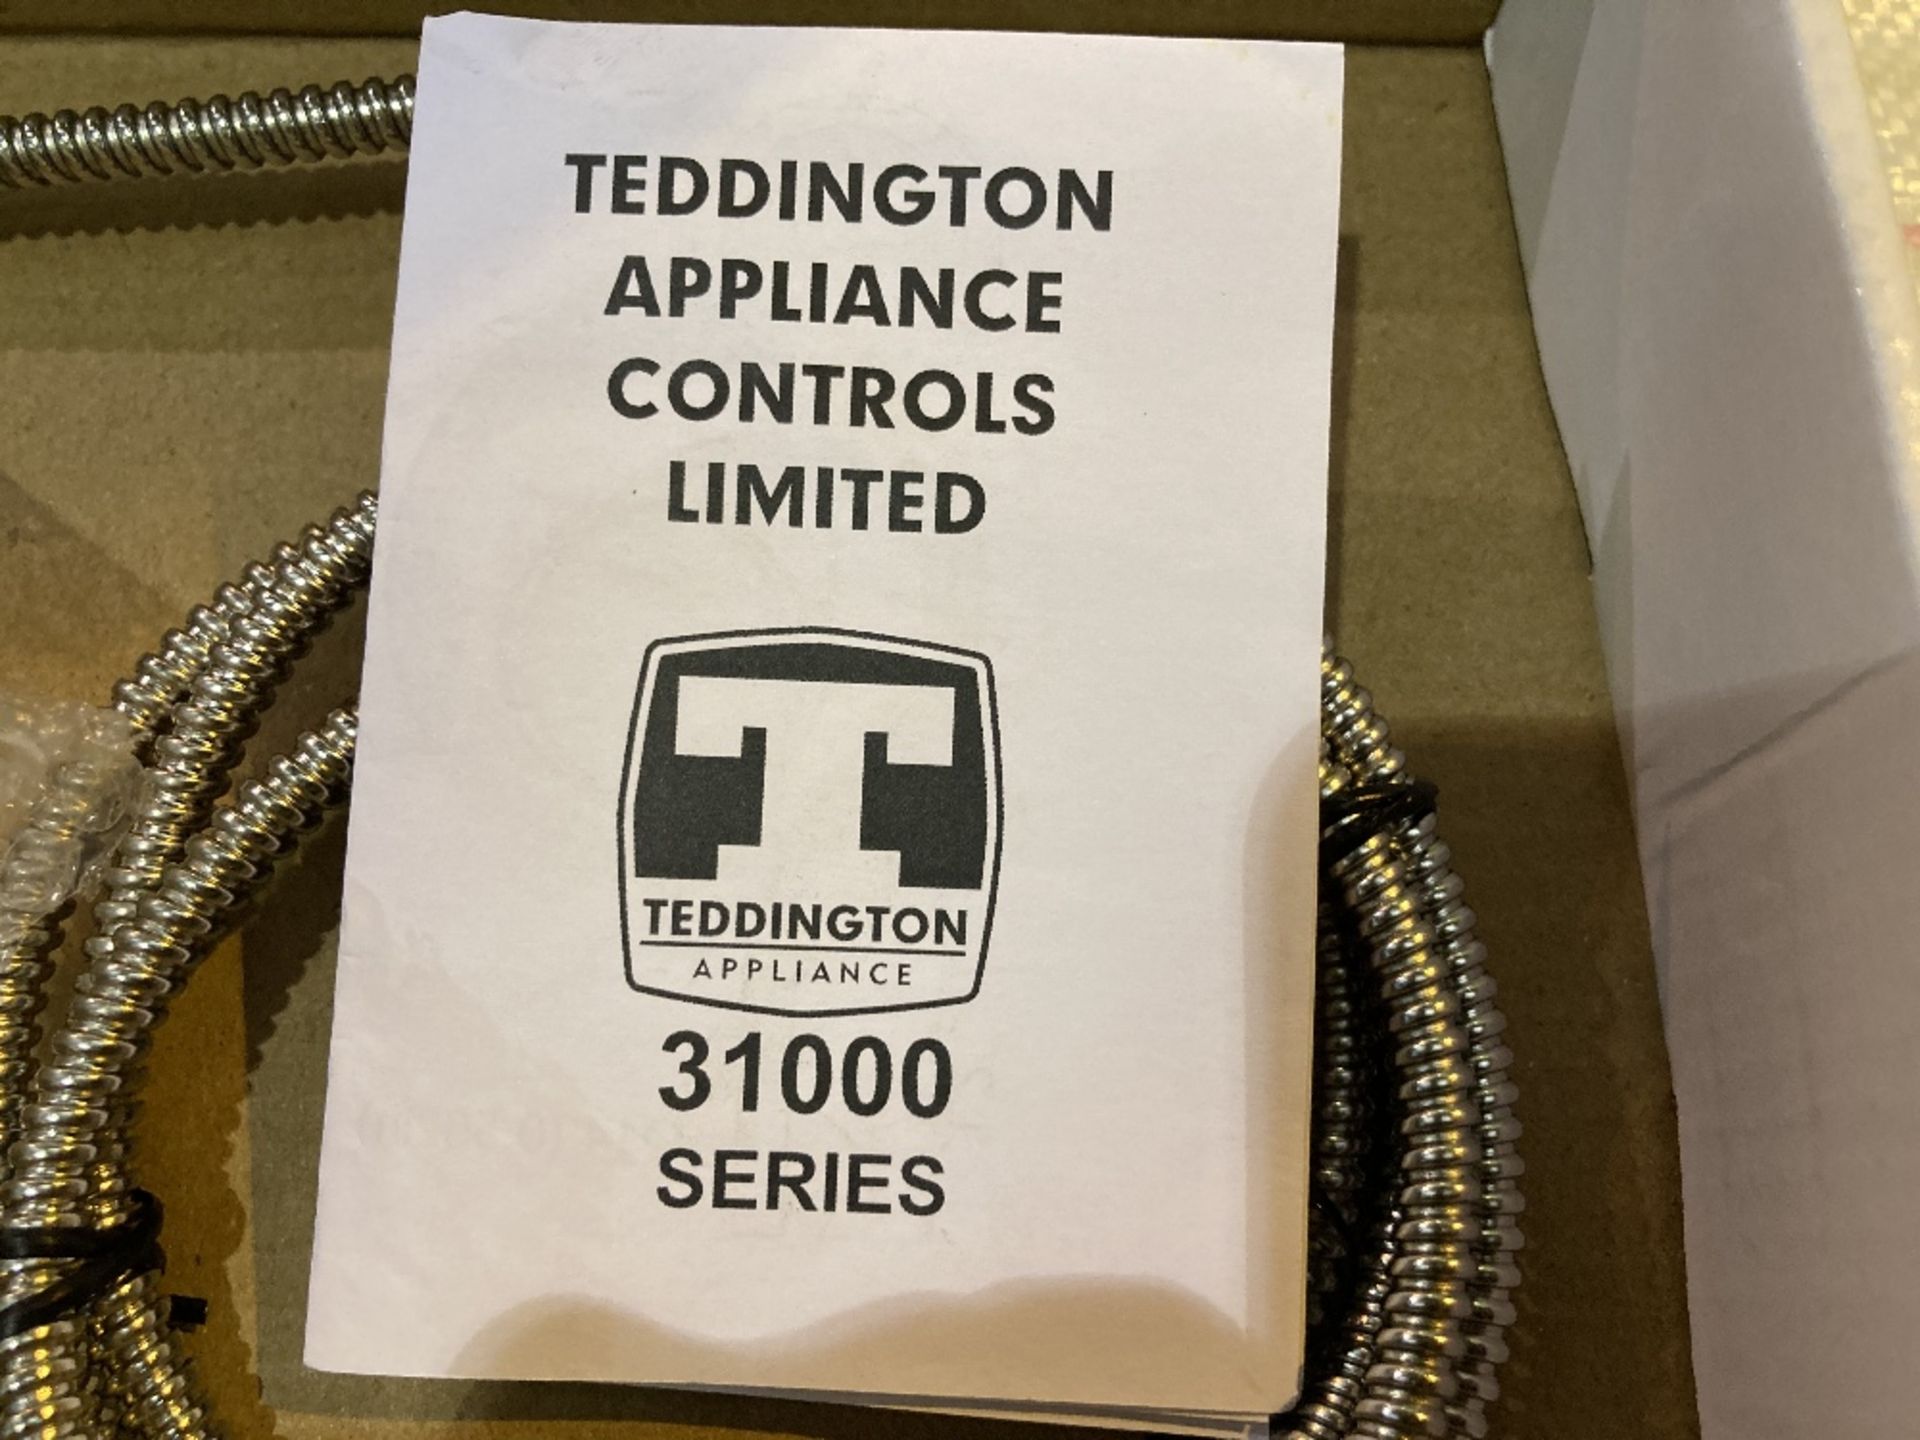 (2) New Teddington Appliance Controls Ltd 4 Inch Dial Thermometer - Image 2 of 4